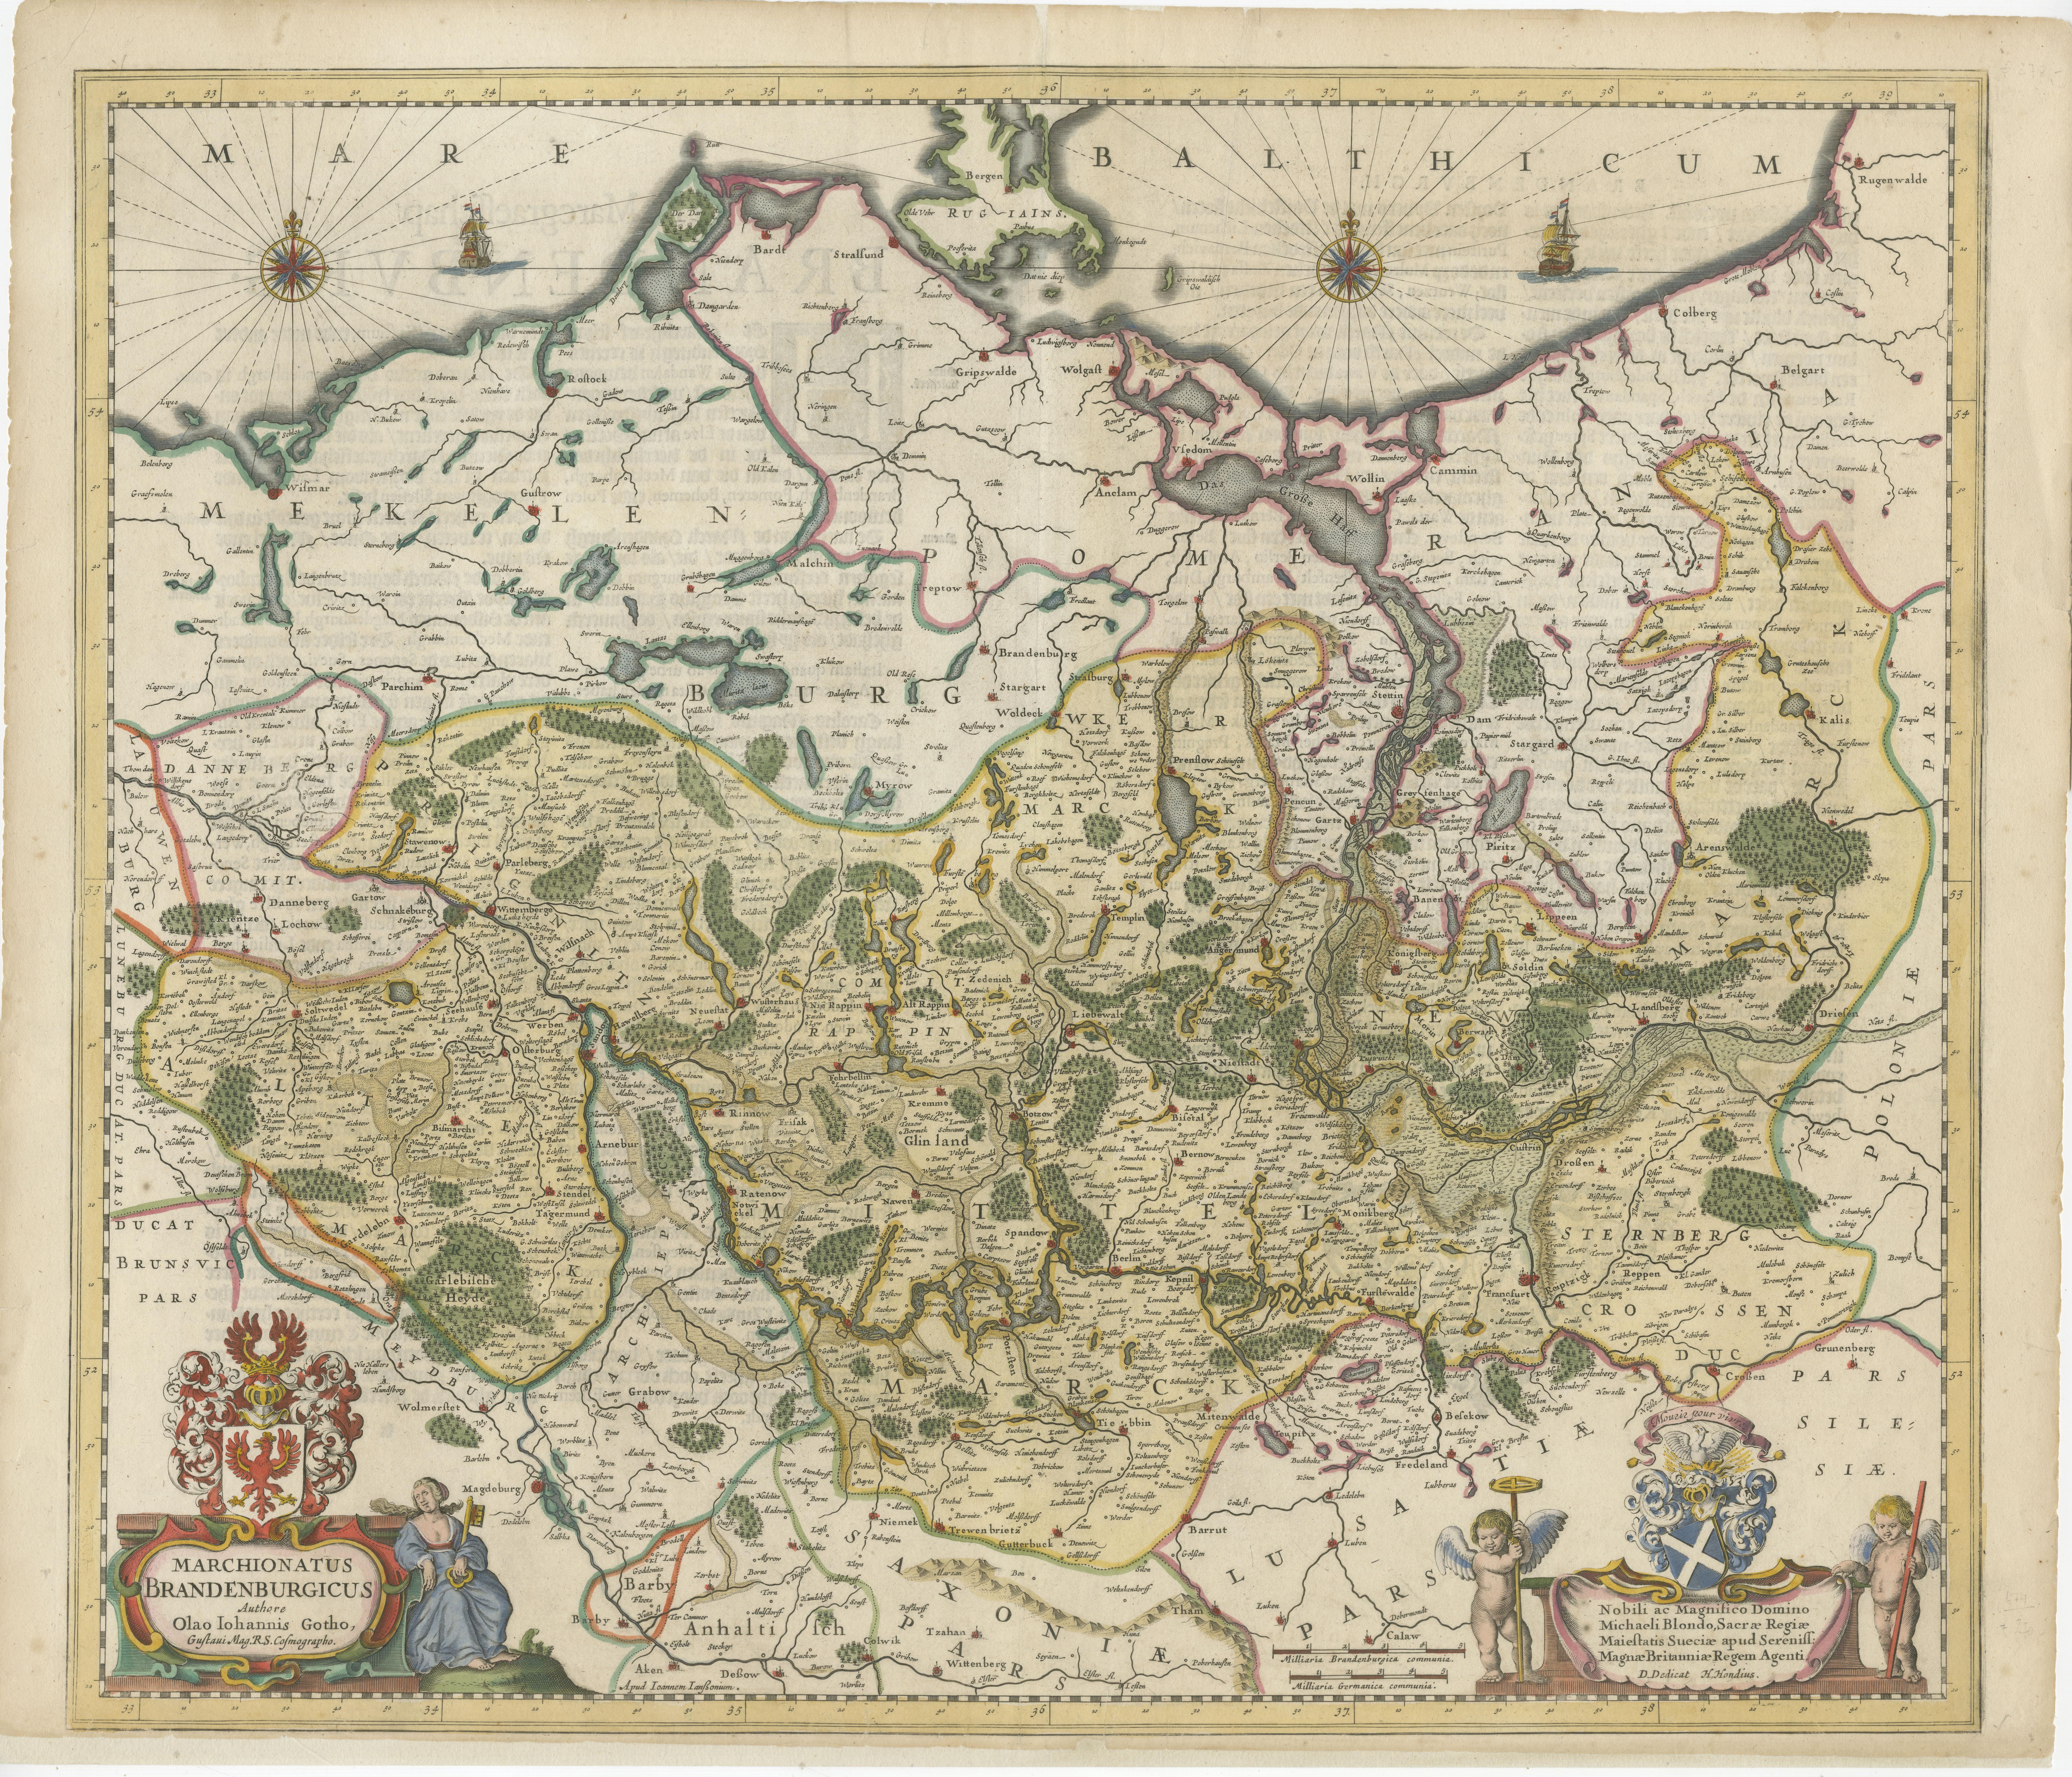 Antique map titled 'Marchionatus Brandenburgicus'. Original antique map of Brandenburg, with Königsberg and Stettin, Germany. Published by J. Janssonius, circ 1650. 

Jan Janssonius (also known as Johann or Jan Jansson or Janszoon) (1588-1664) was a